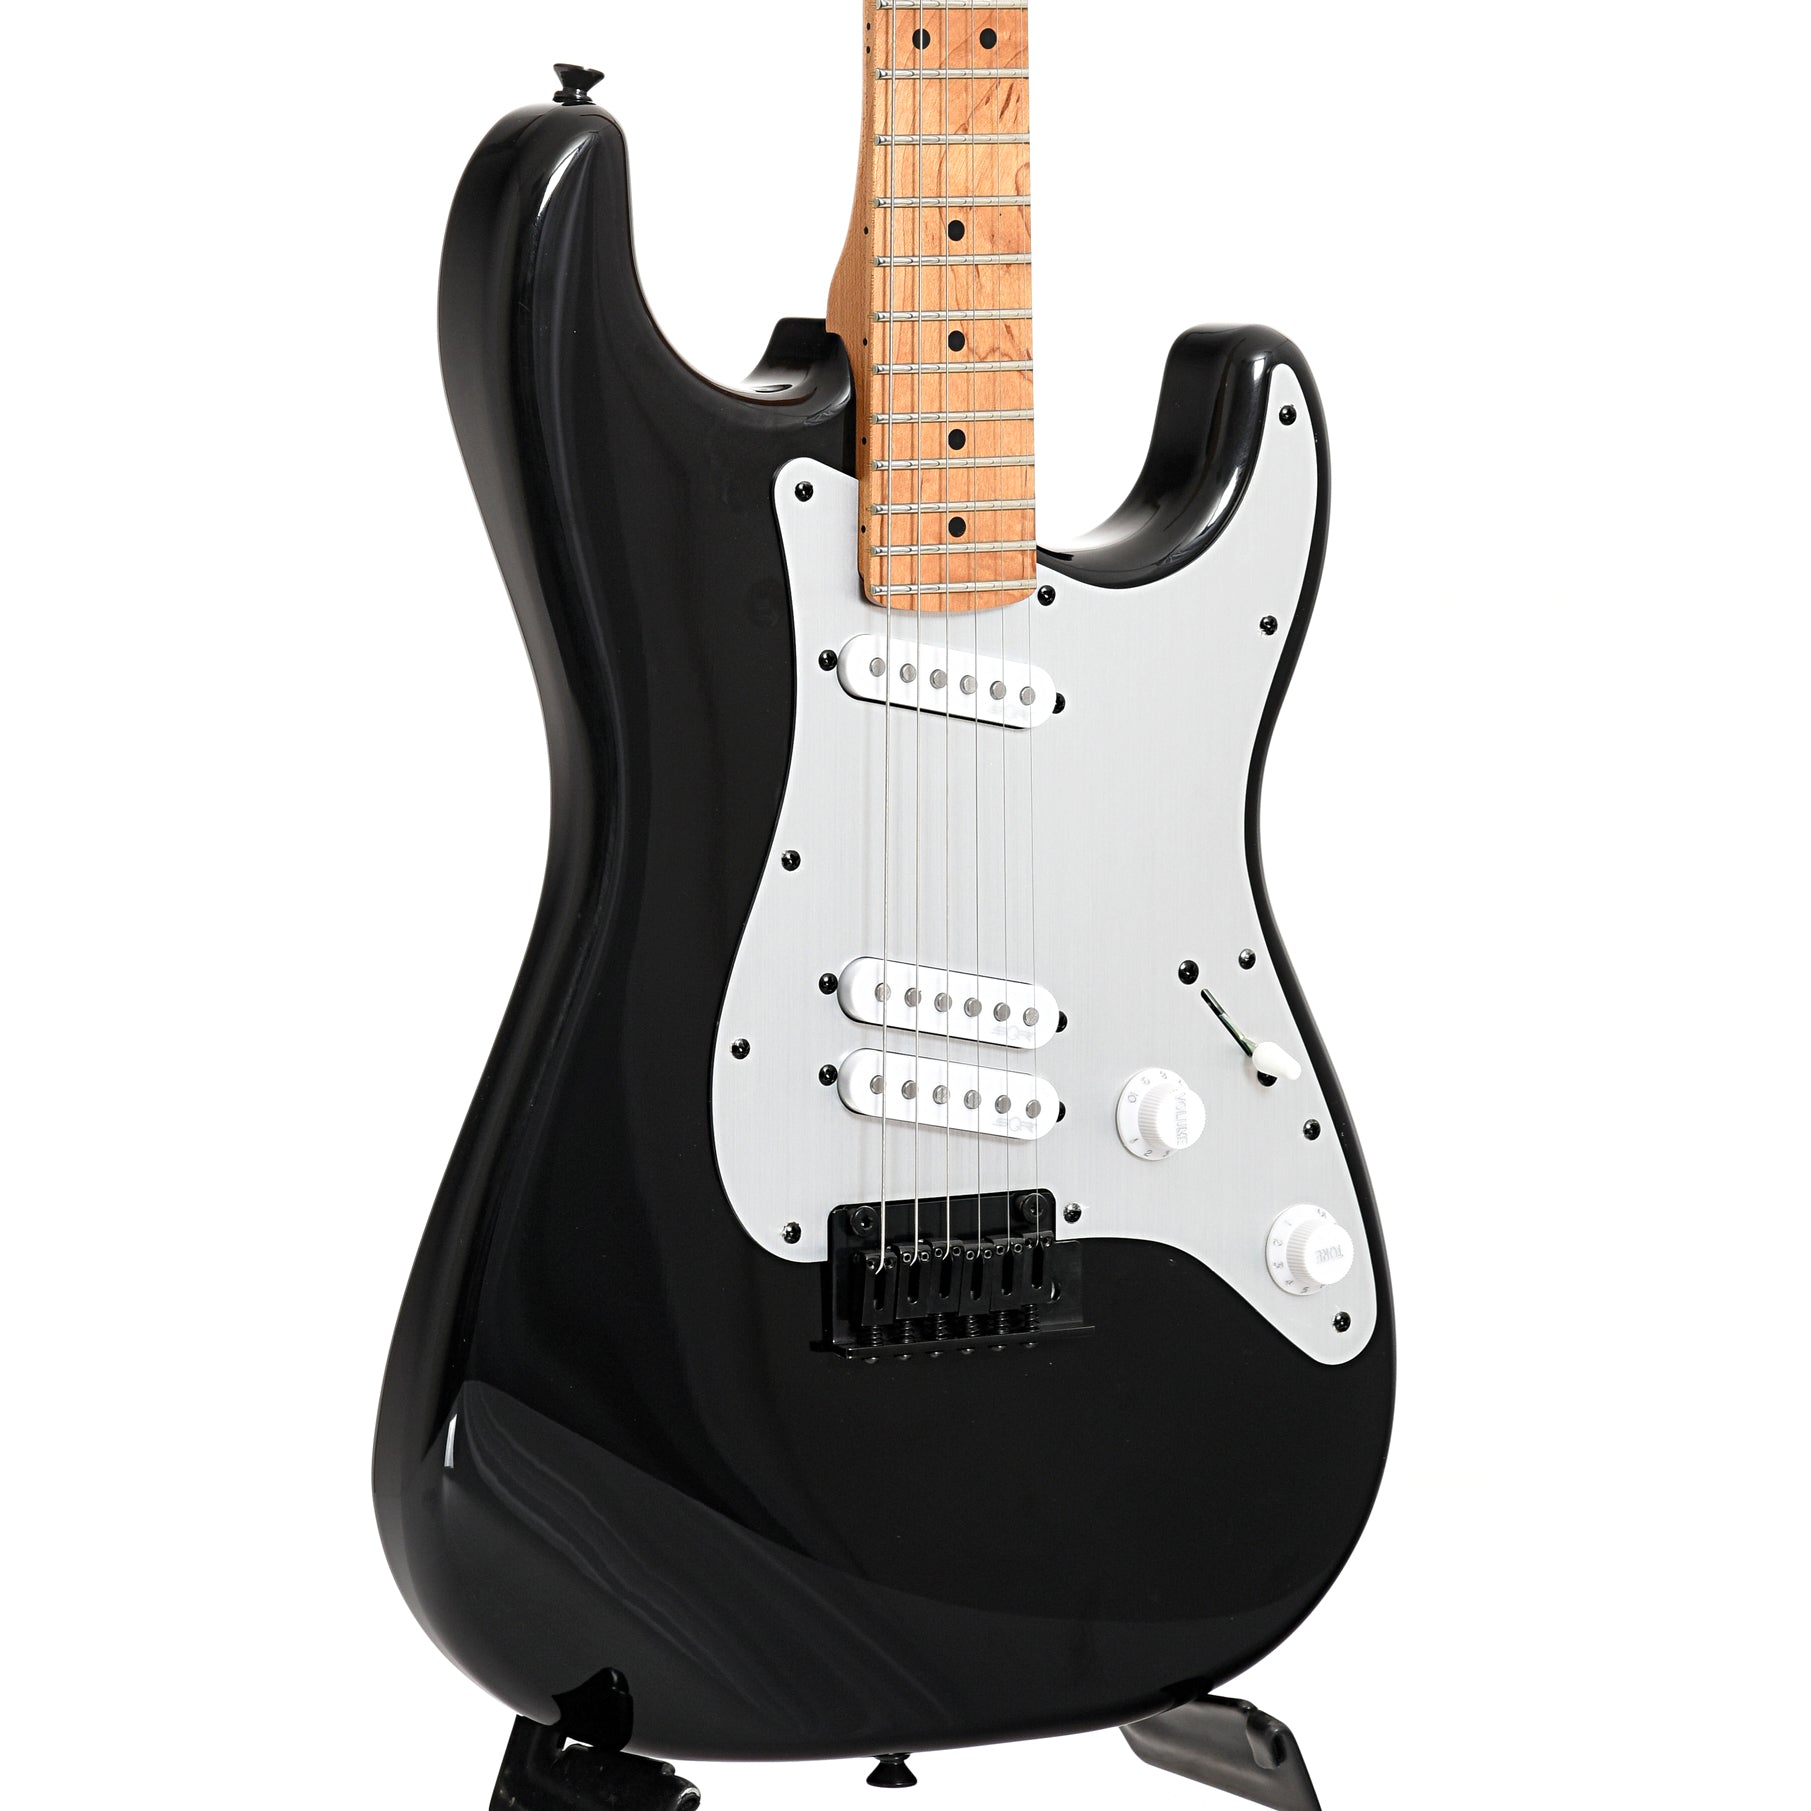 Image 3 of Squier Contemporary Stratocaster Special, Black - SKU# SCSSB : Product Type Solid Body Electric Guitars : Elderly Instruments